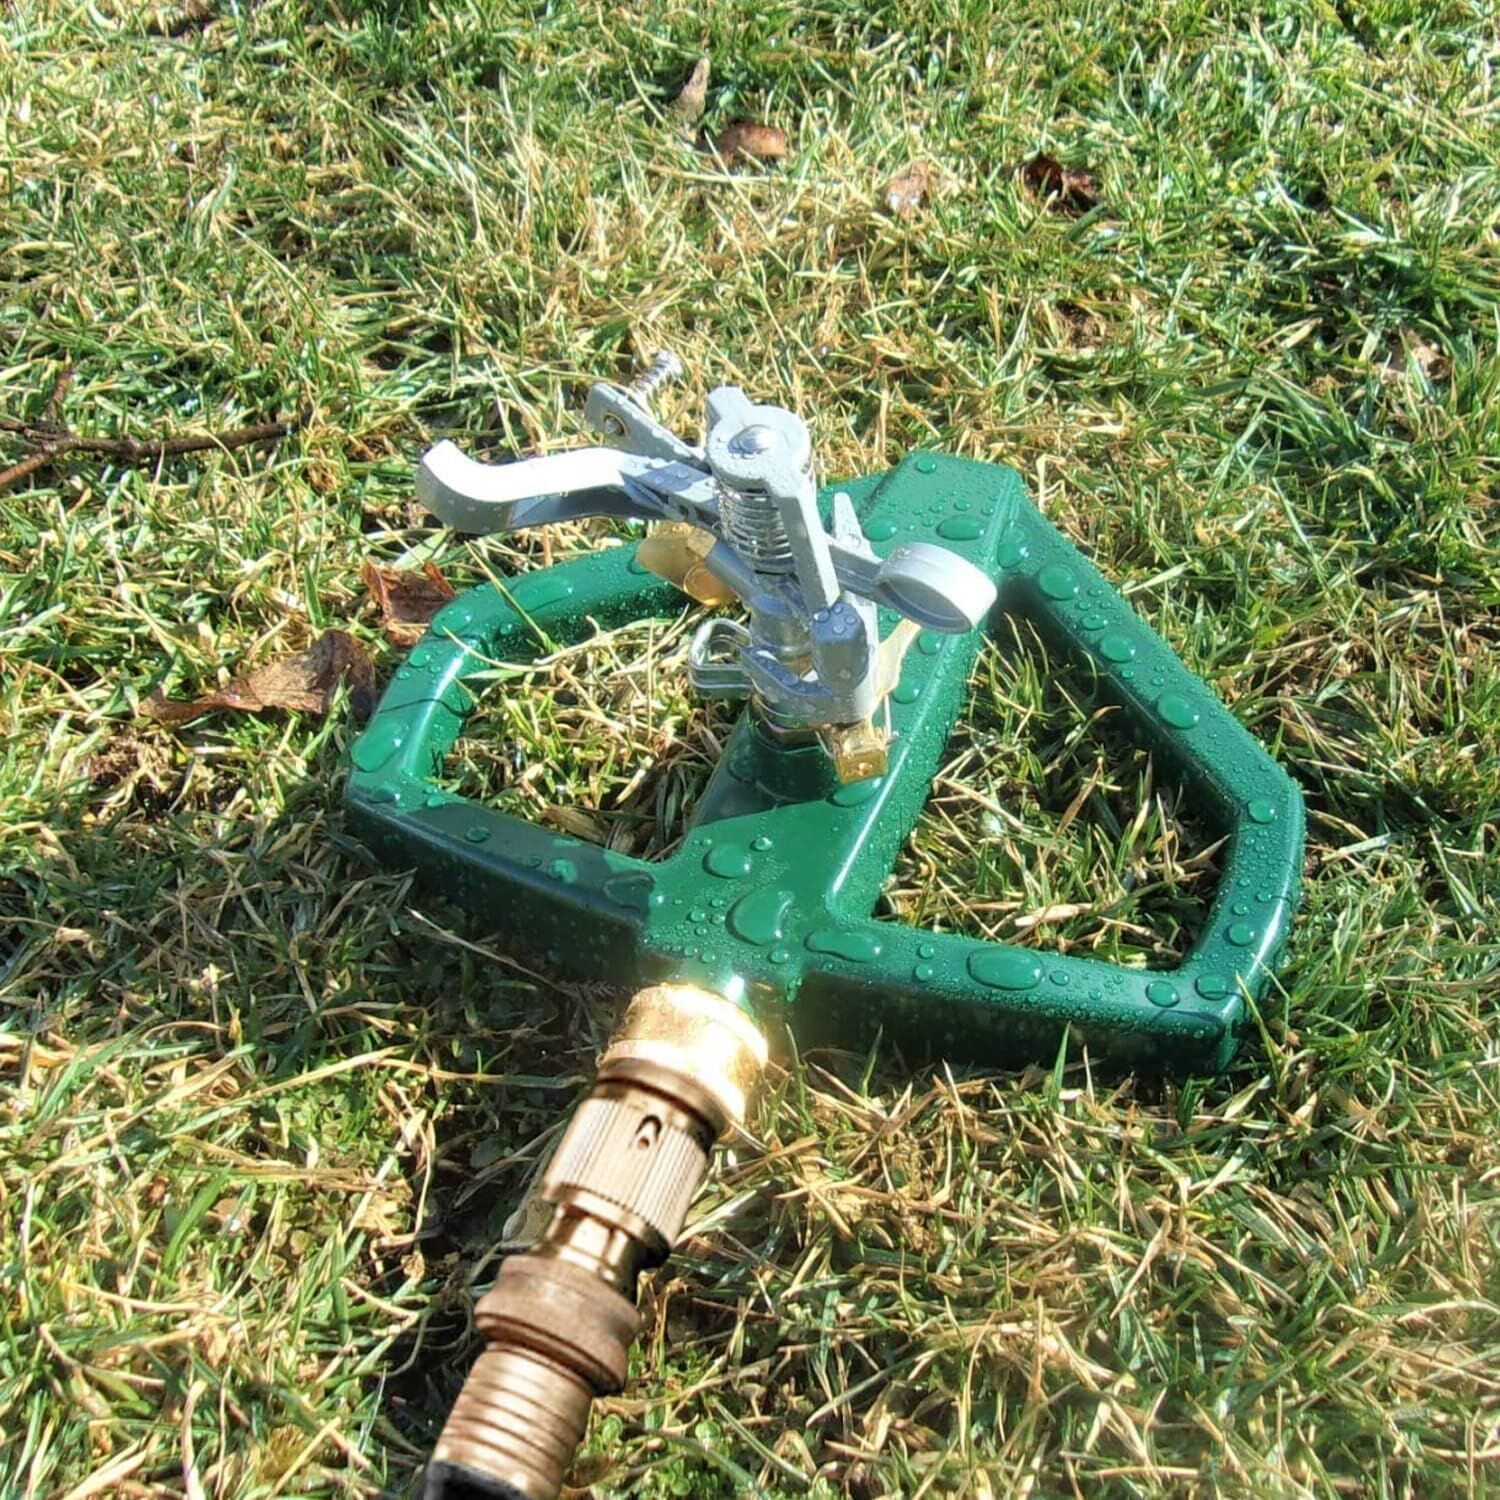 3 in 1 Portable Sprinkler System with 5 Spray Settings